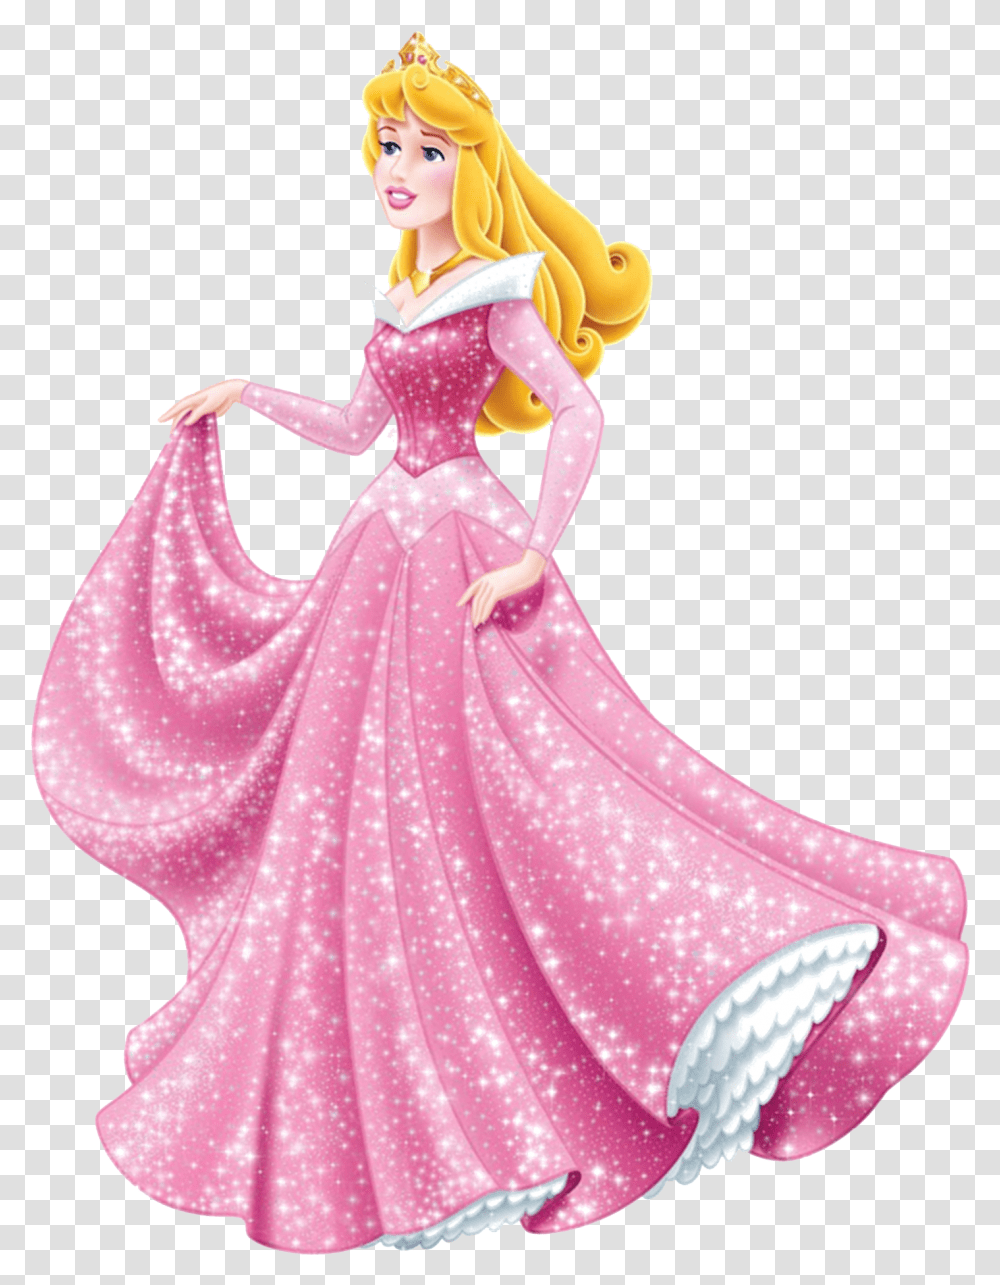 Sleeping Beauty Free Download Beauty The Disney Princess, Figurine, Doll, Toy, Barbie Transparent Png